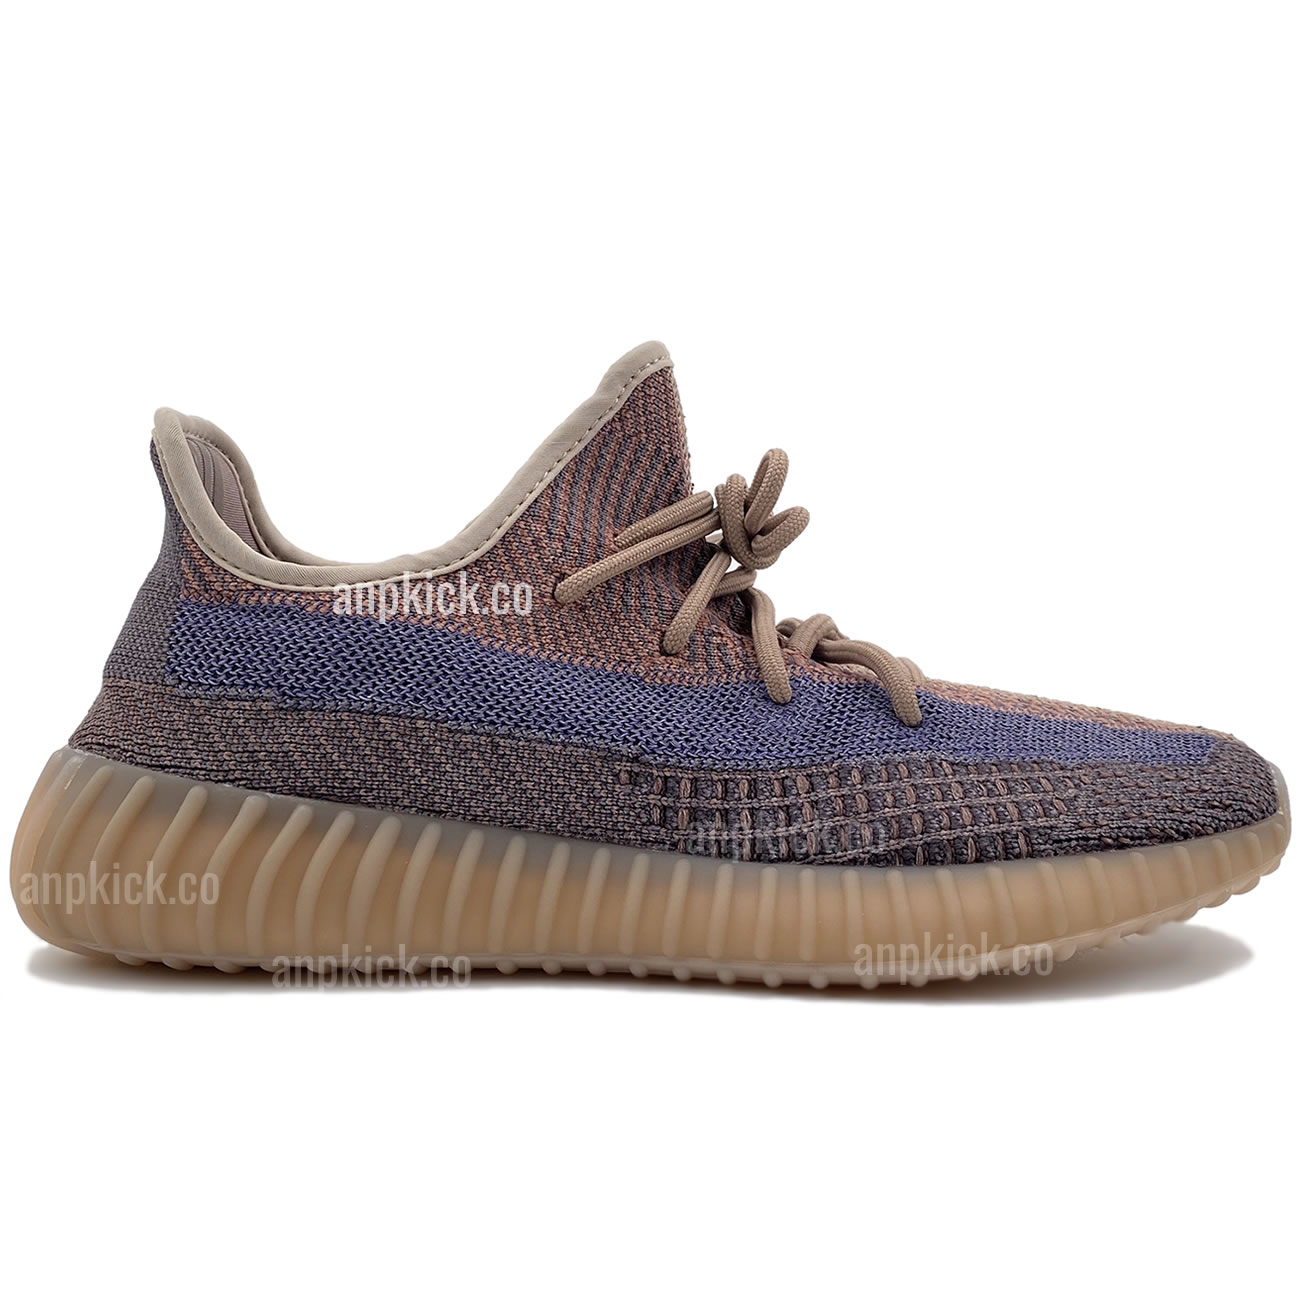 Adidas Yeezy Boost 350 V2 Yecher Ho2795 New Release Date First Look (2) - www.newkick.org